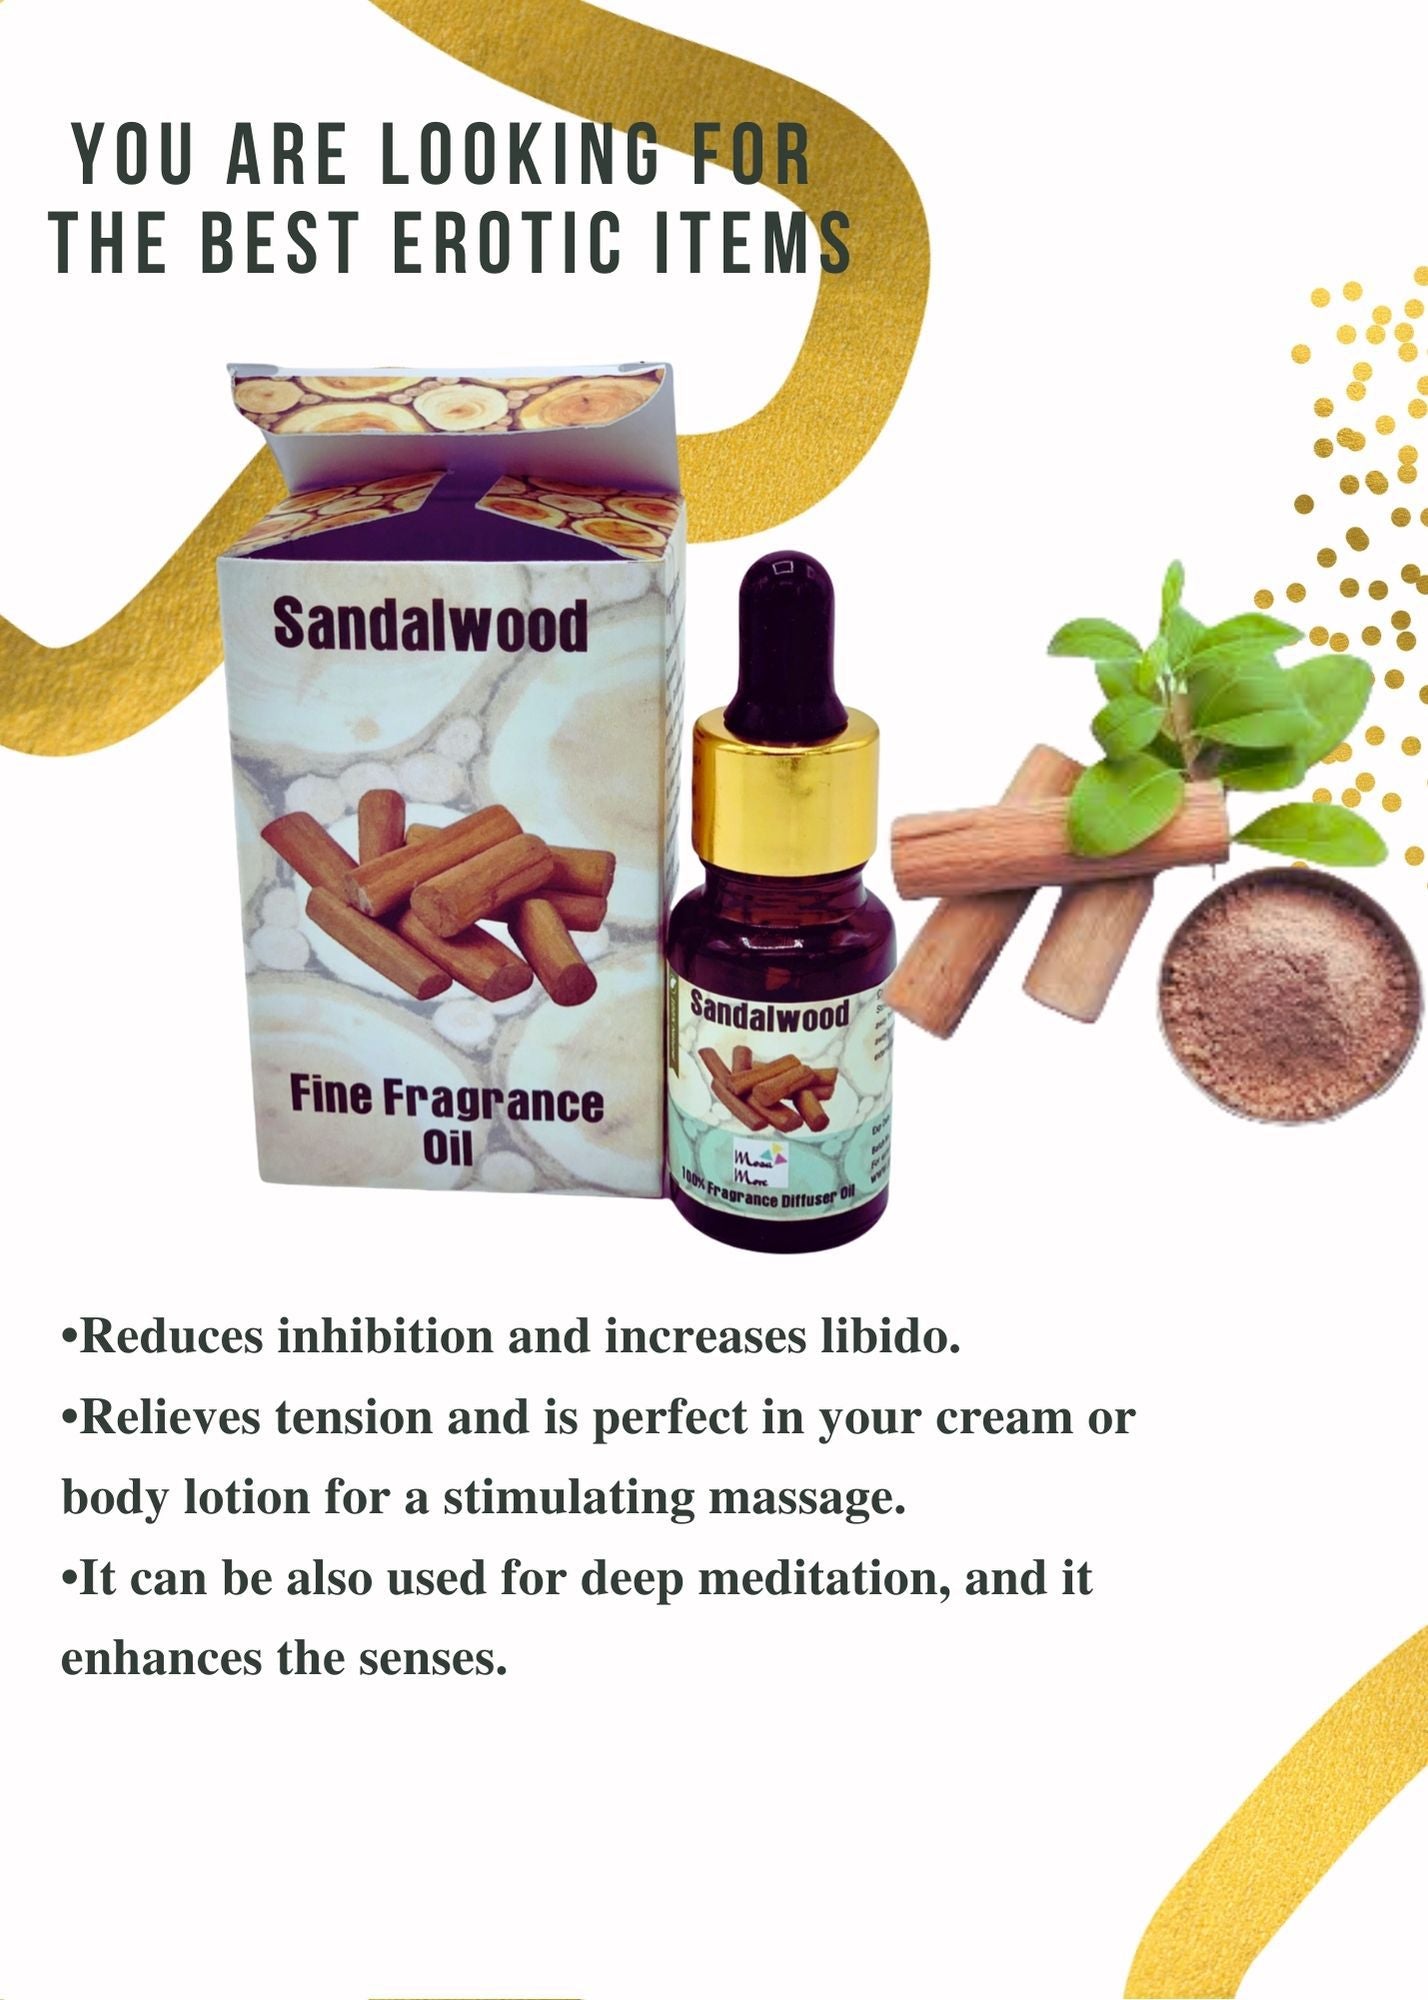 Mosa More Sandalwood Fine Fragrance Oil Aromatherapy for Diffuser, Massage, Libido arousal, Inhibition reduction 10ml